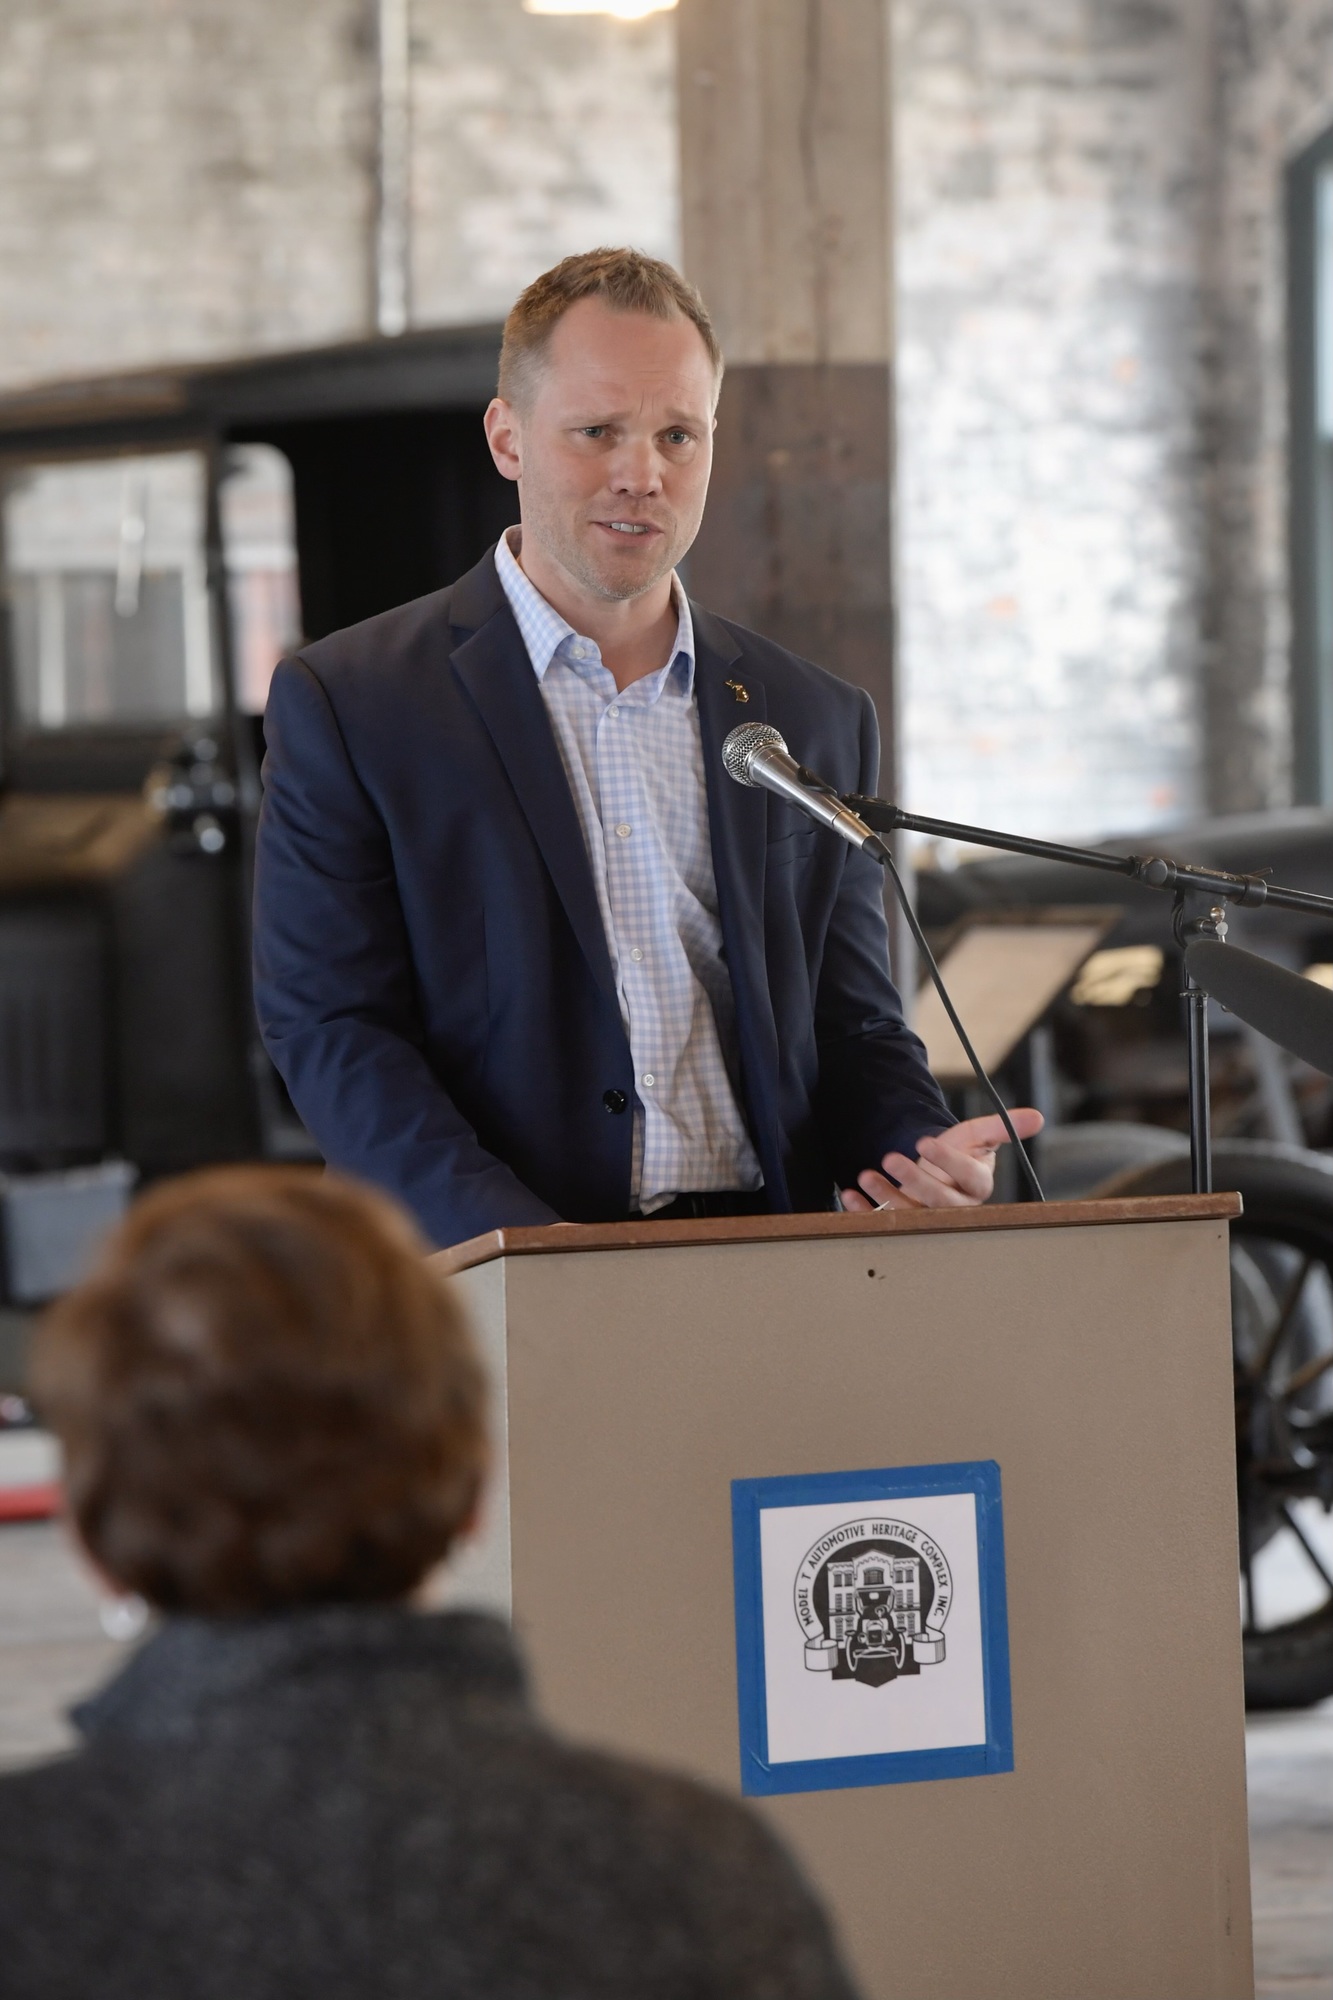 Trevor Pawl, Chief Mobility Officer with the Office of Future Mobility and Electrification